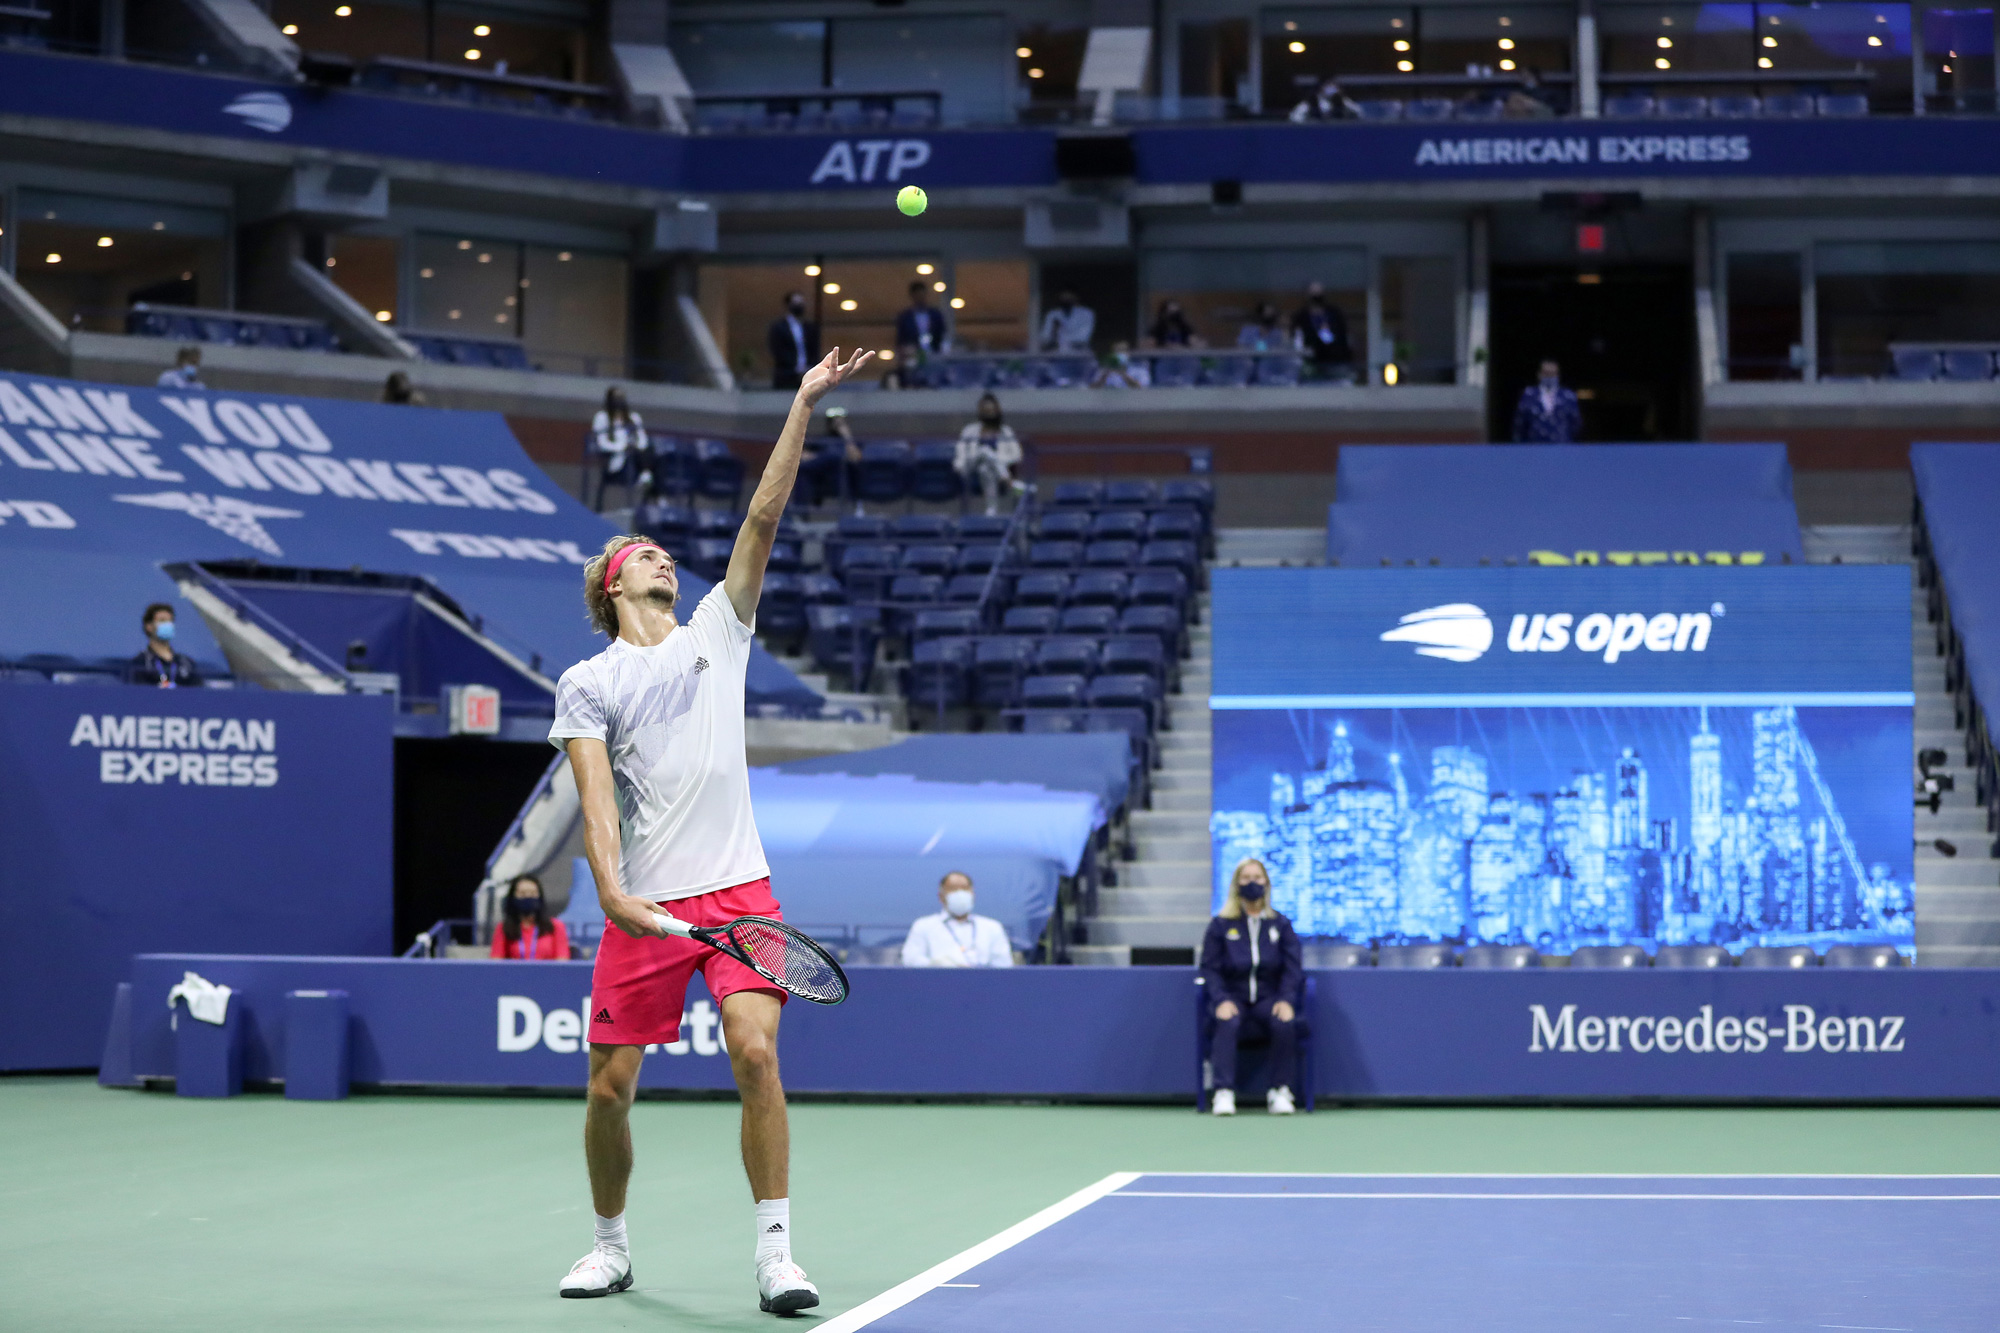 Us Open Tennis Tournament To Allow 100 Fan Capacity In 2021 Bloomberg